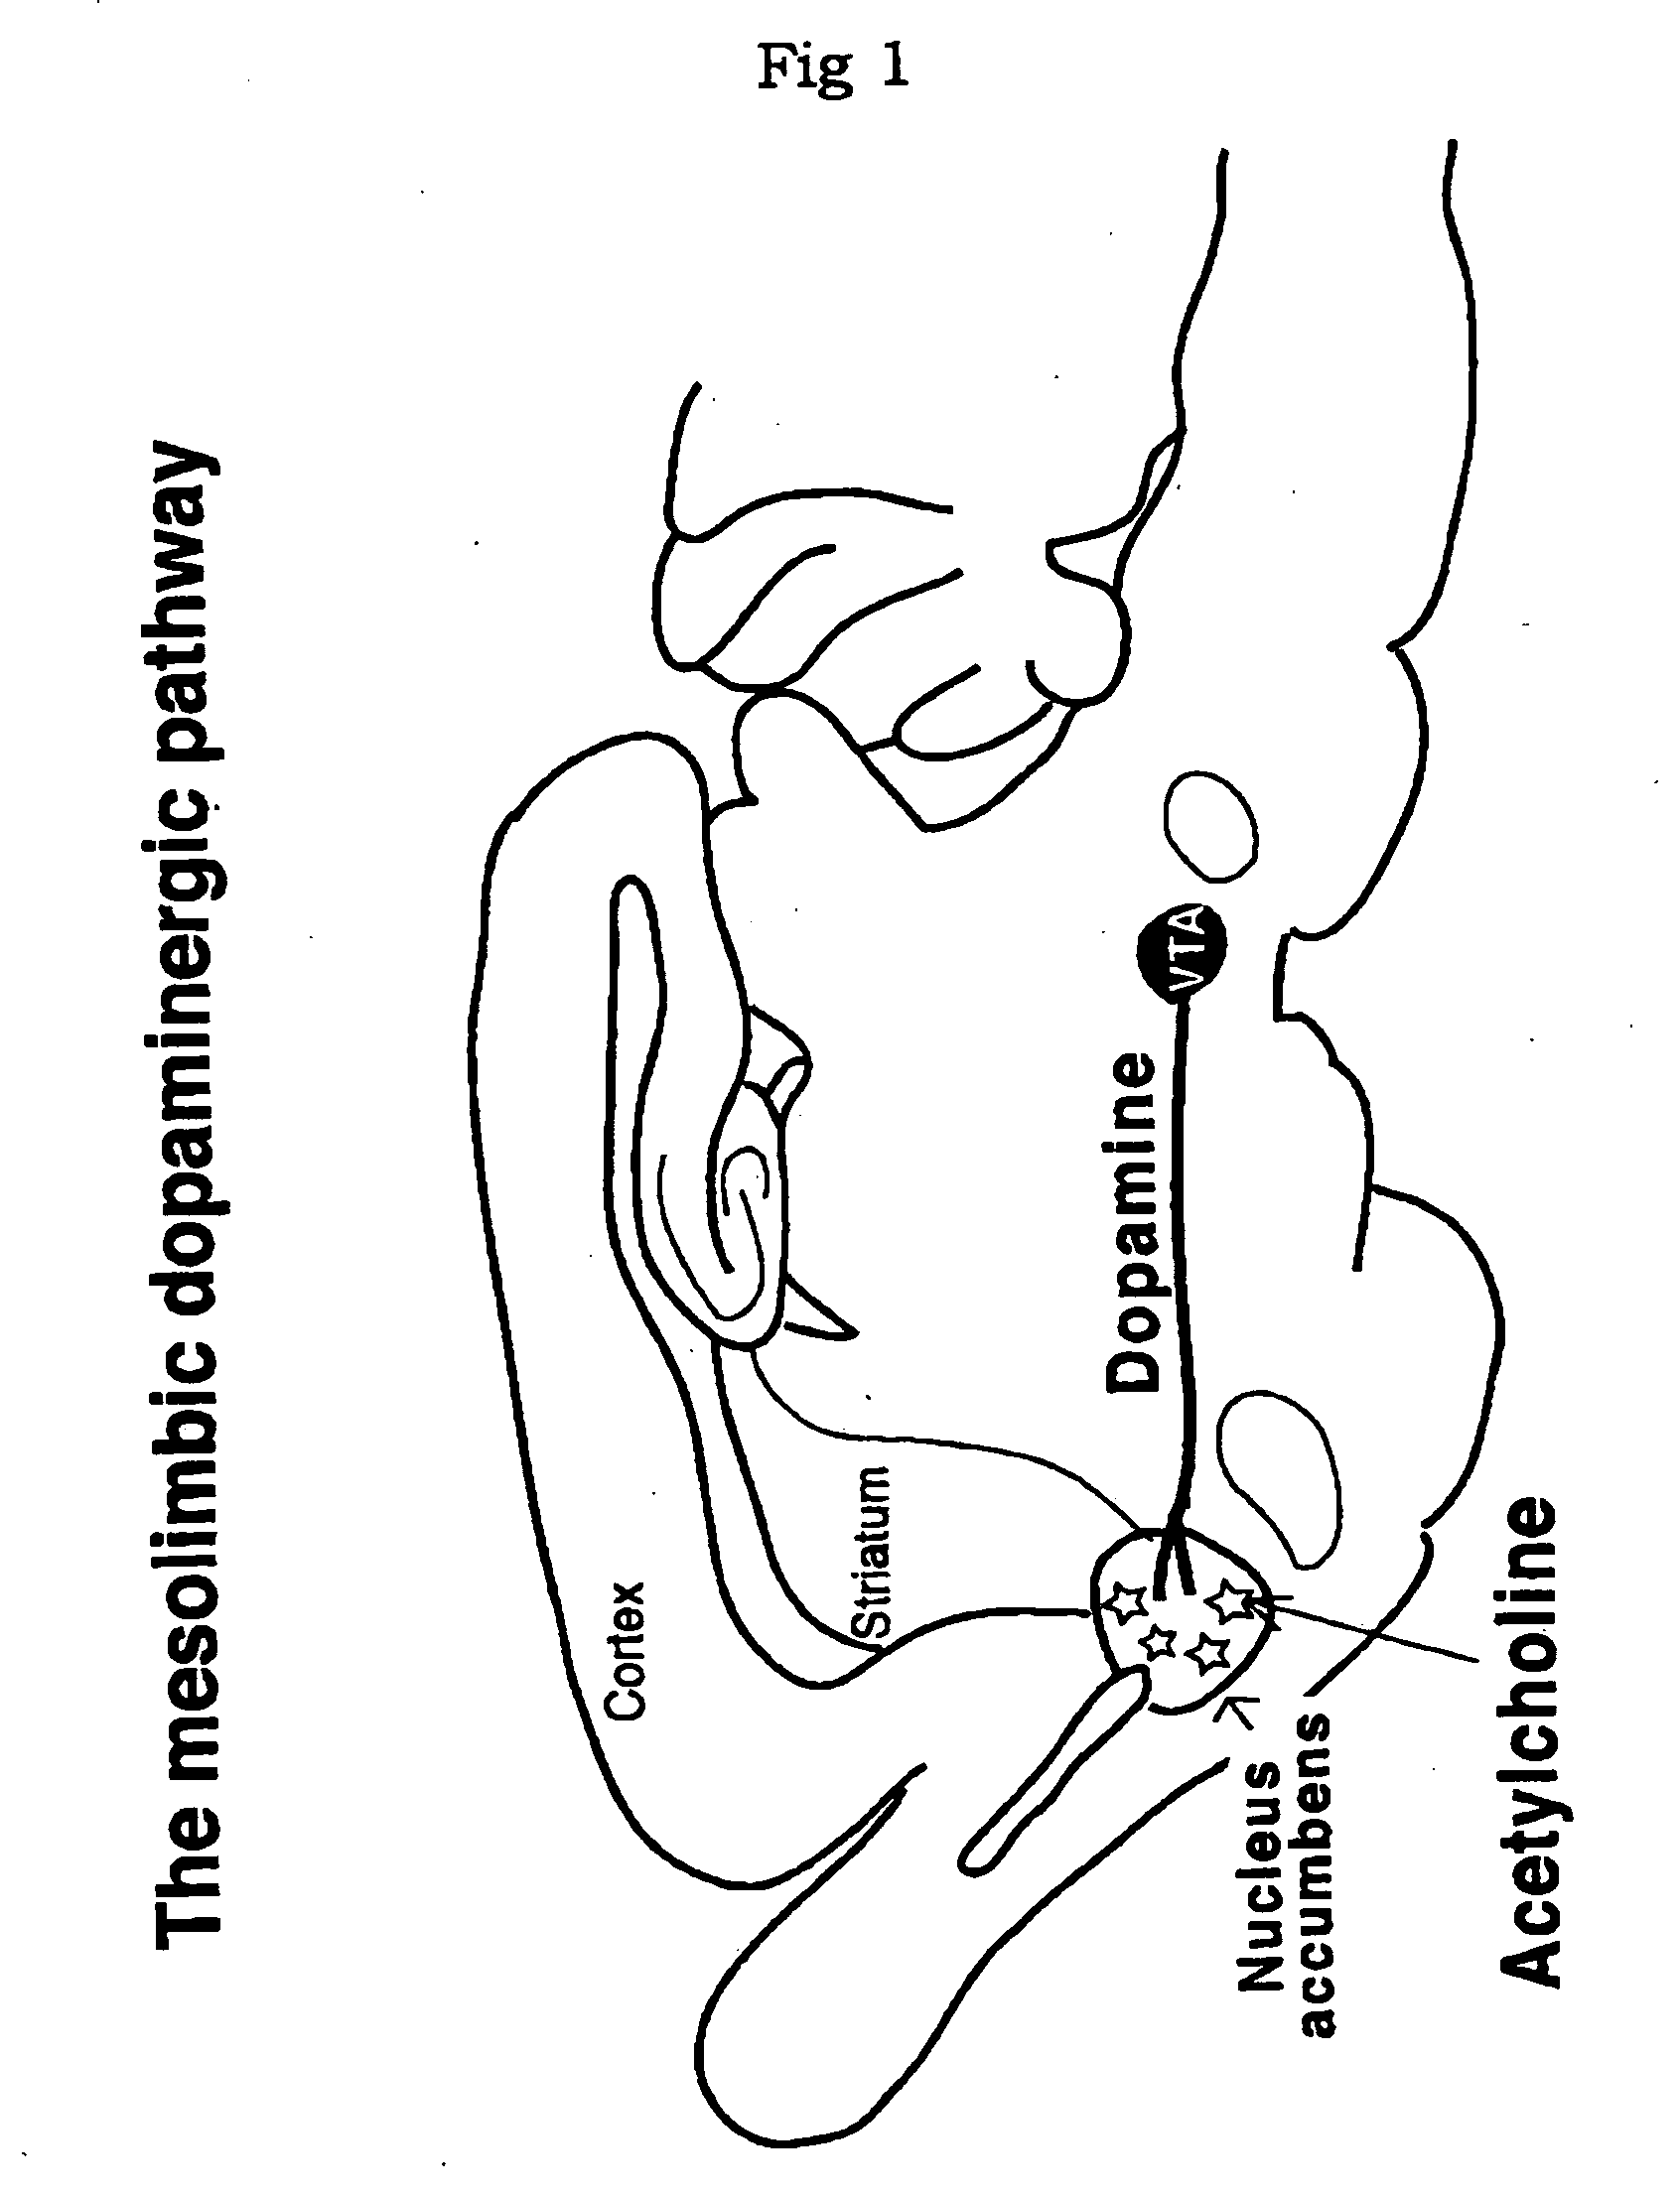 Pharmaceutical composition for treatment of drug dependence